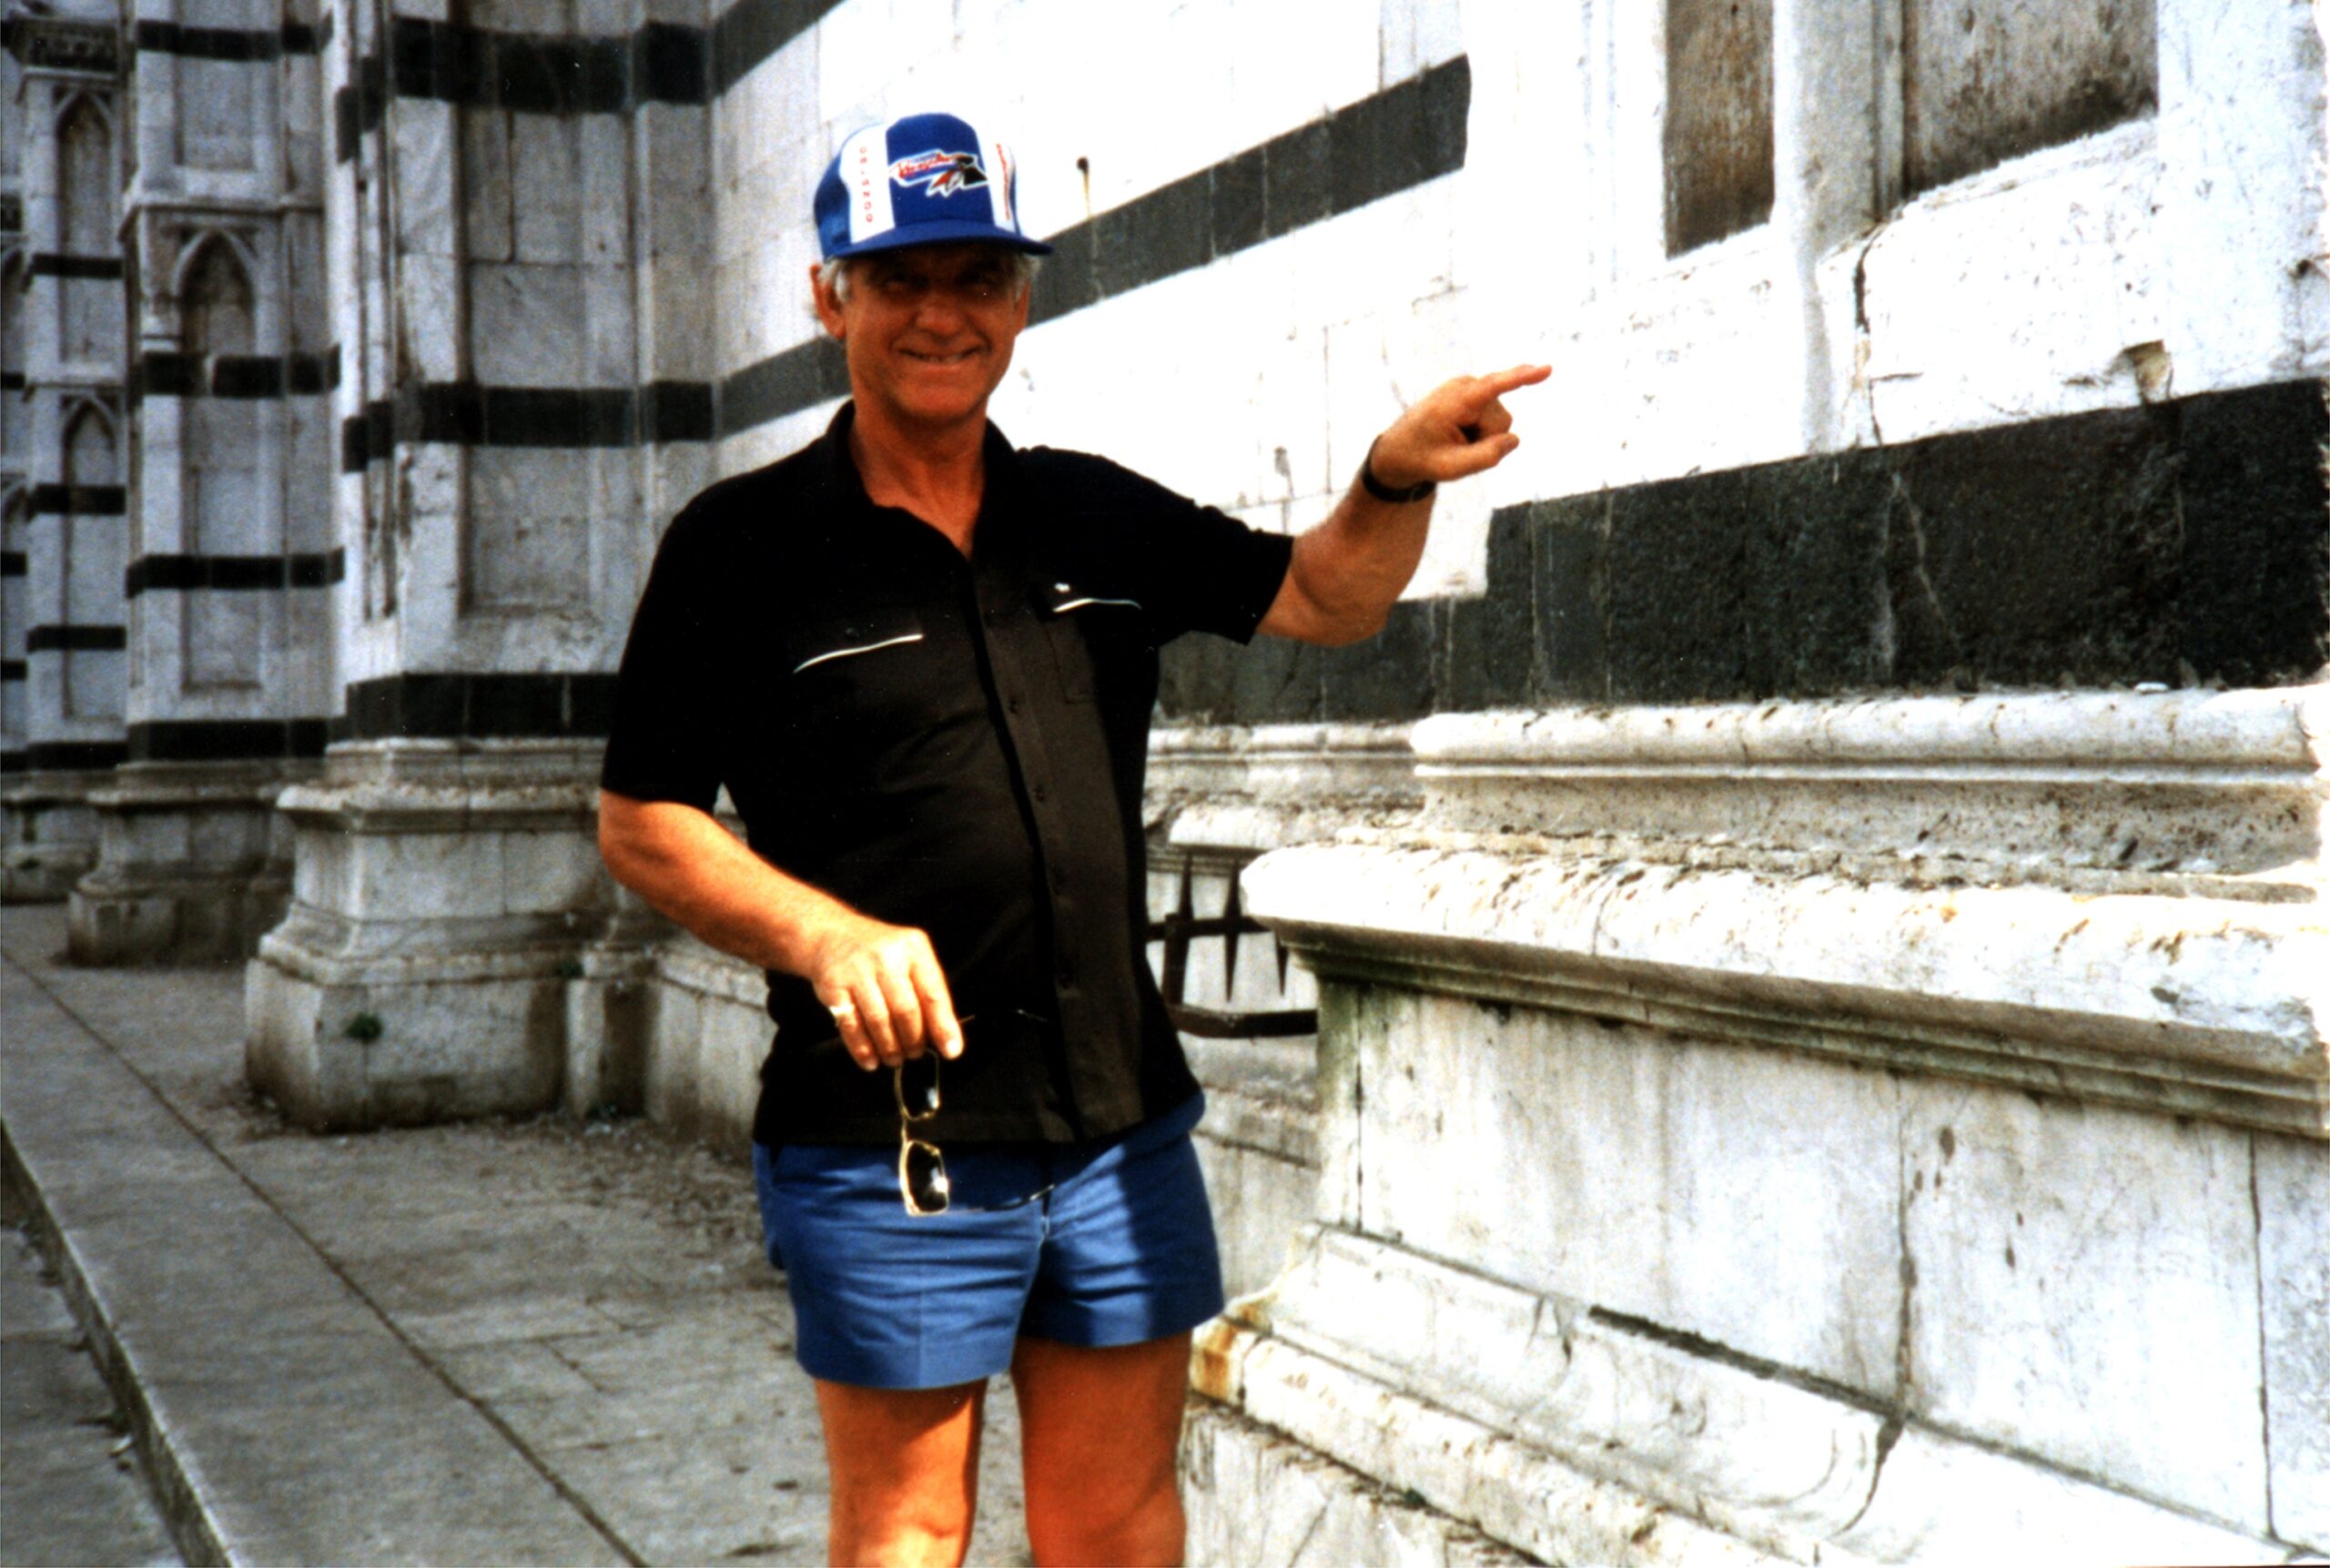 A colour archive photo of Ugolini wearing a polo shirt, shorts and a baseball cap smiling at the camera. It looks like a holiday photo. 